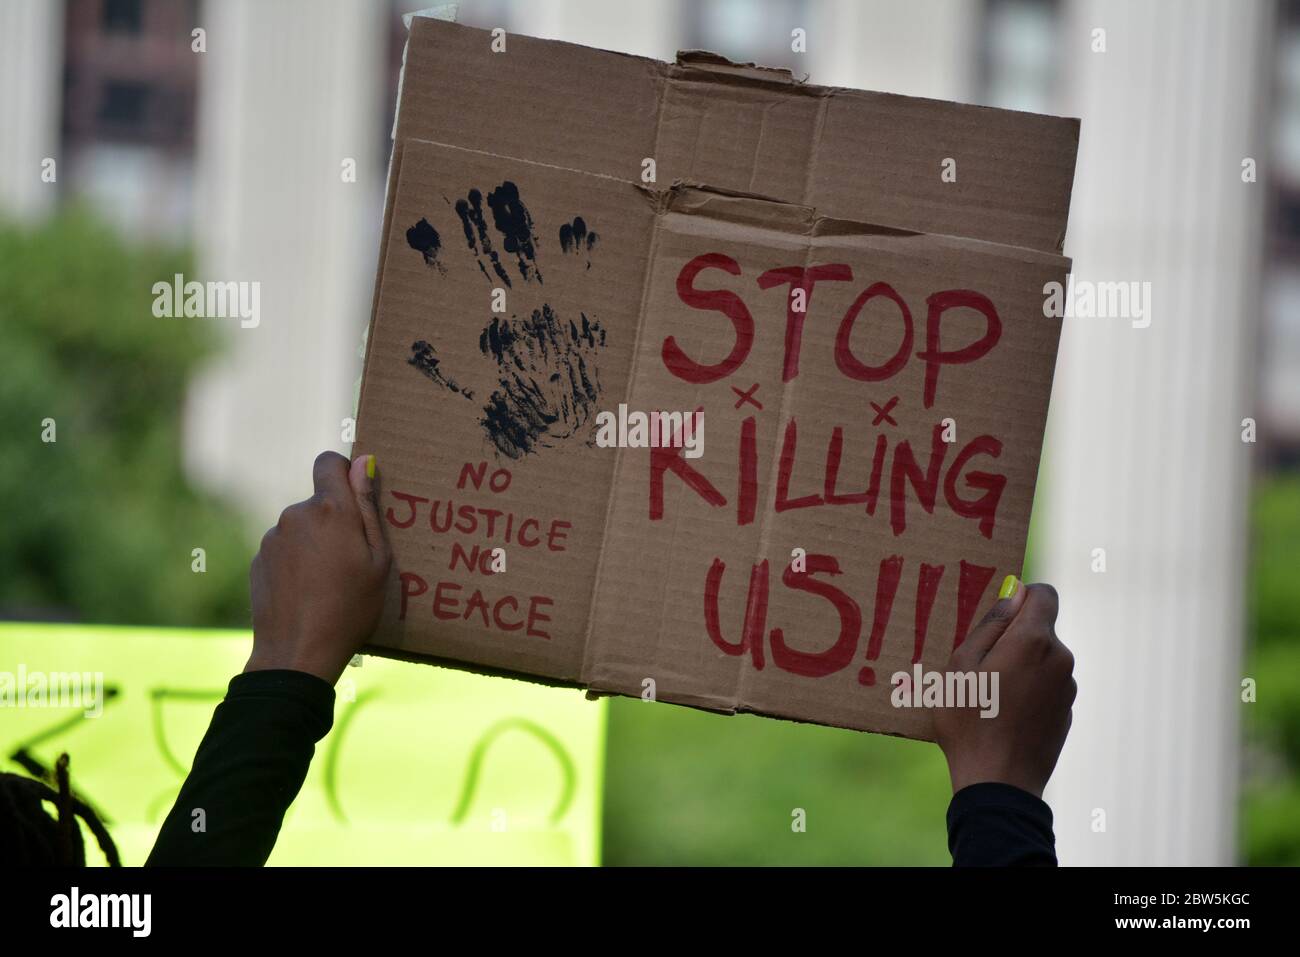 Protest march against police brutality in Lower Manhattan following the death of Minneapolis man George Loyd at the hands of local police. Stock Photo